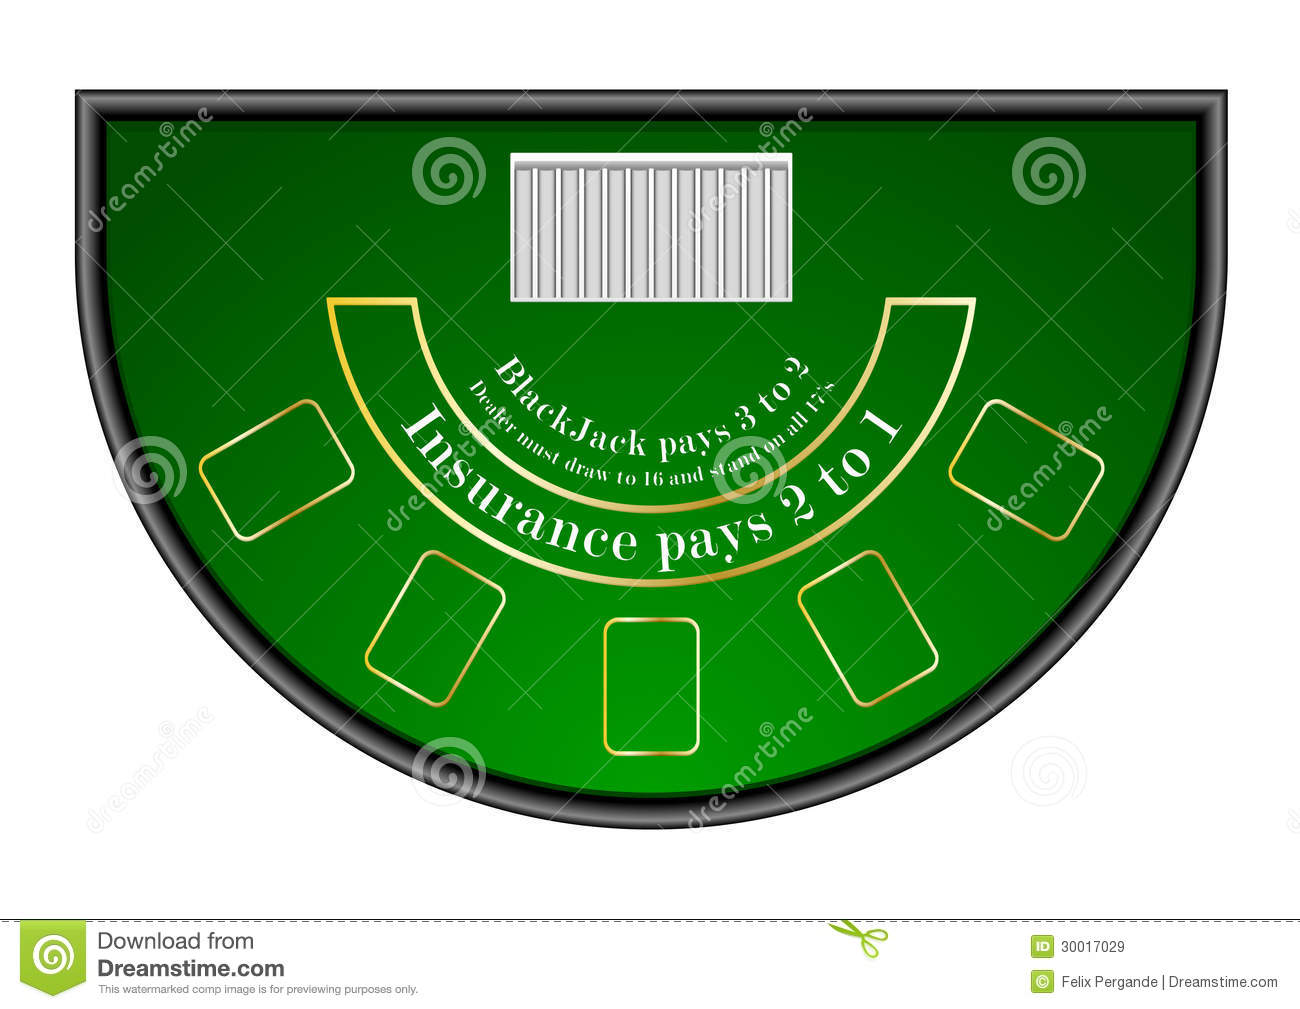 Black Jack Table Royalty Free Stock Images   Image  30017029